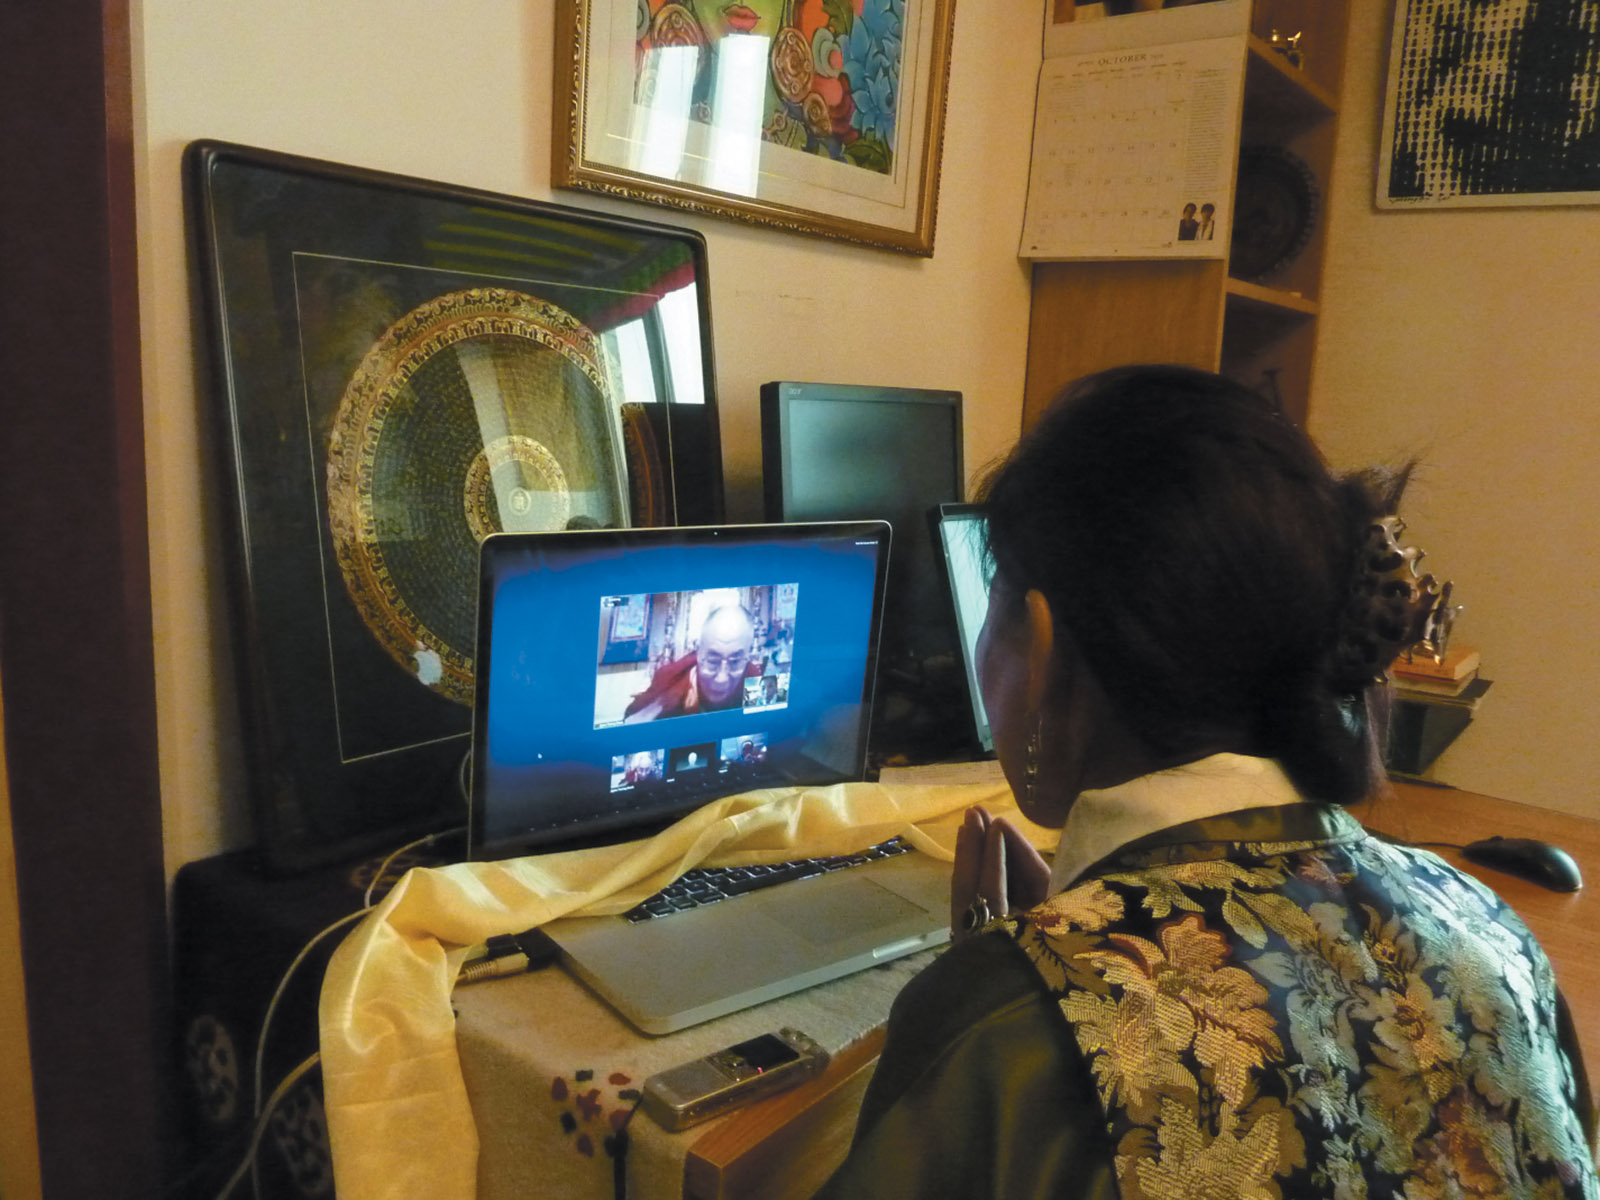 Tsering Woeser meeting the Dalai Lama over the Internet during a video conversation organized by her husband, the Chinese writer Wang Lixiong, and the Chinese human rights lawyers Teng Biao and Jiang Tianyong, Beijing, January 2011